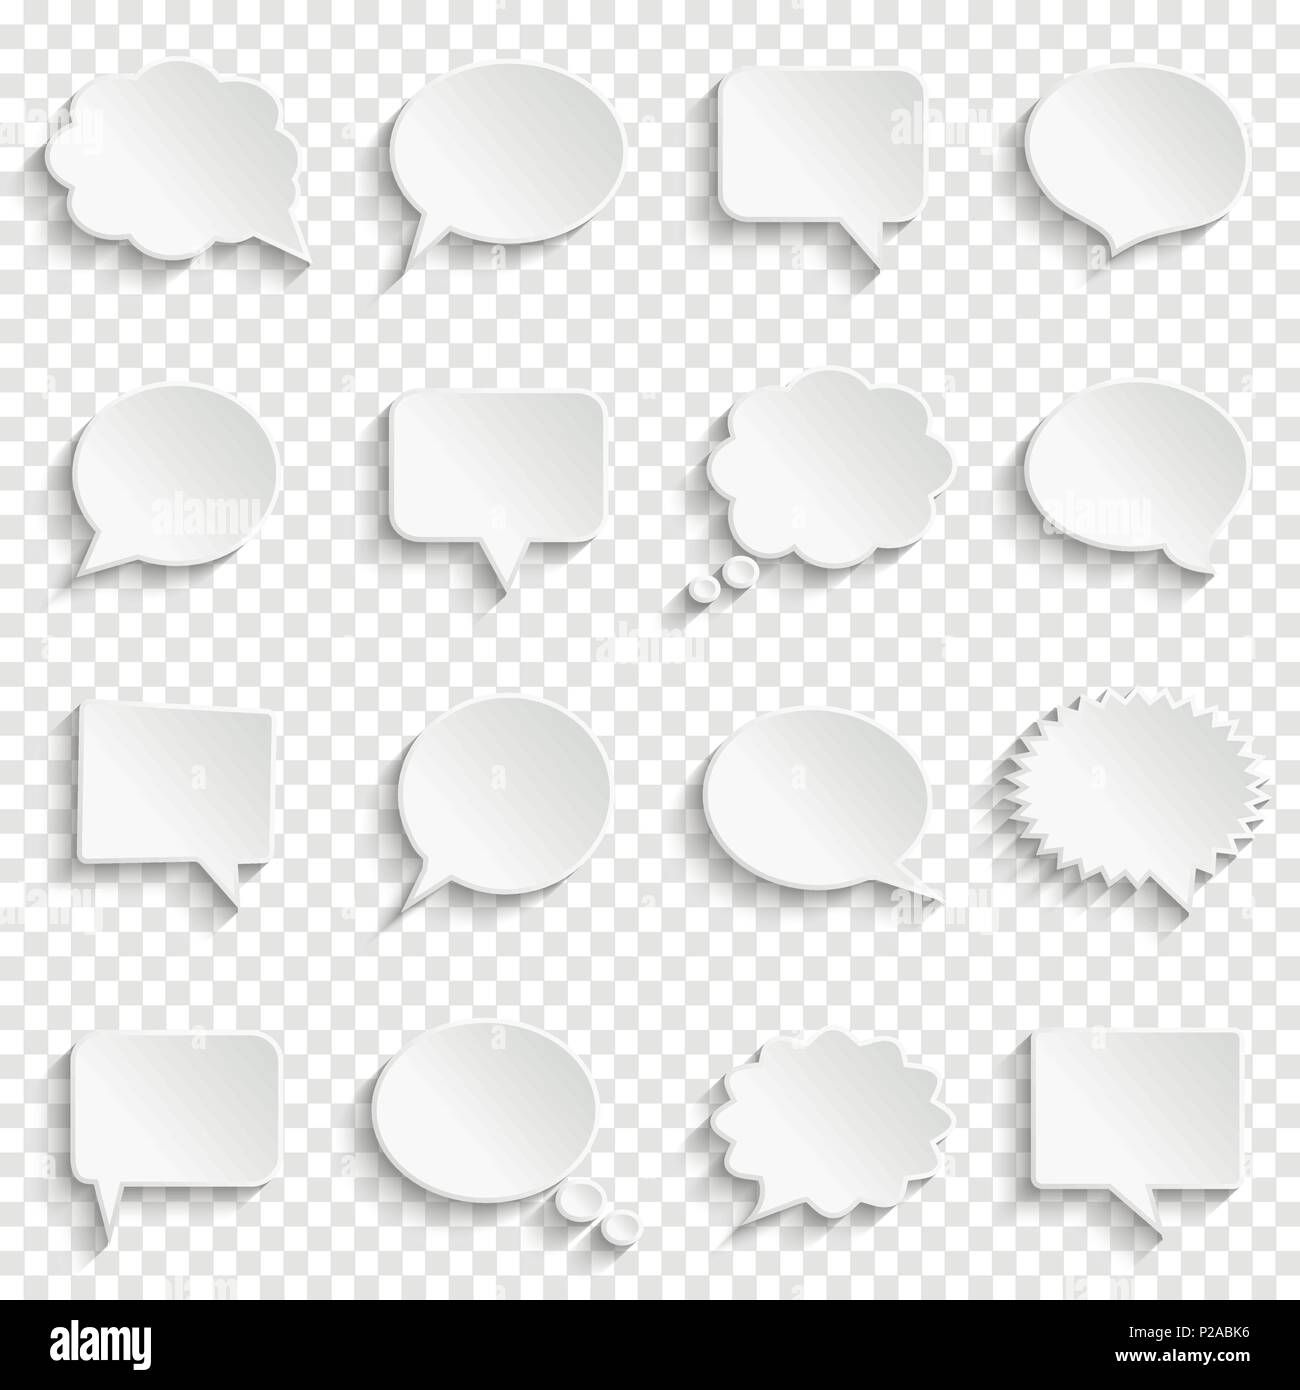 Abstract white speech bubbles set on transparent background, paper art style, vector illustration Stock Vector